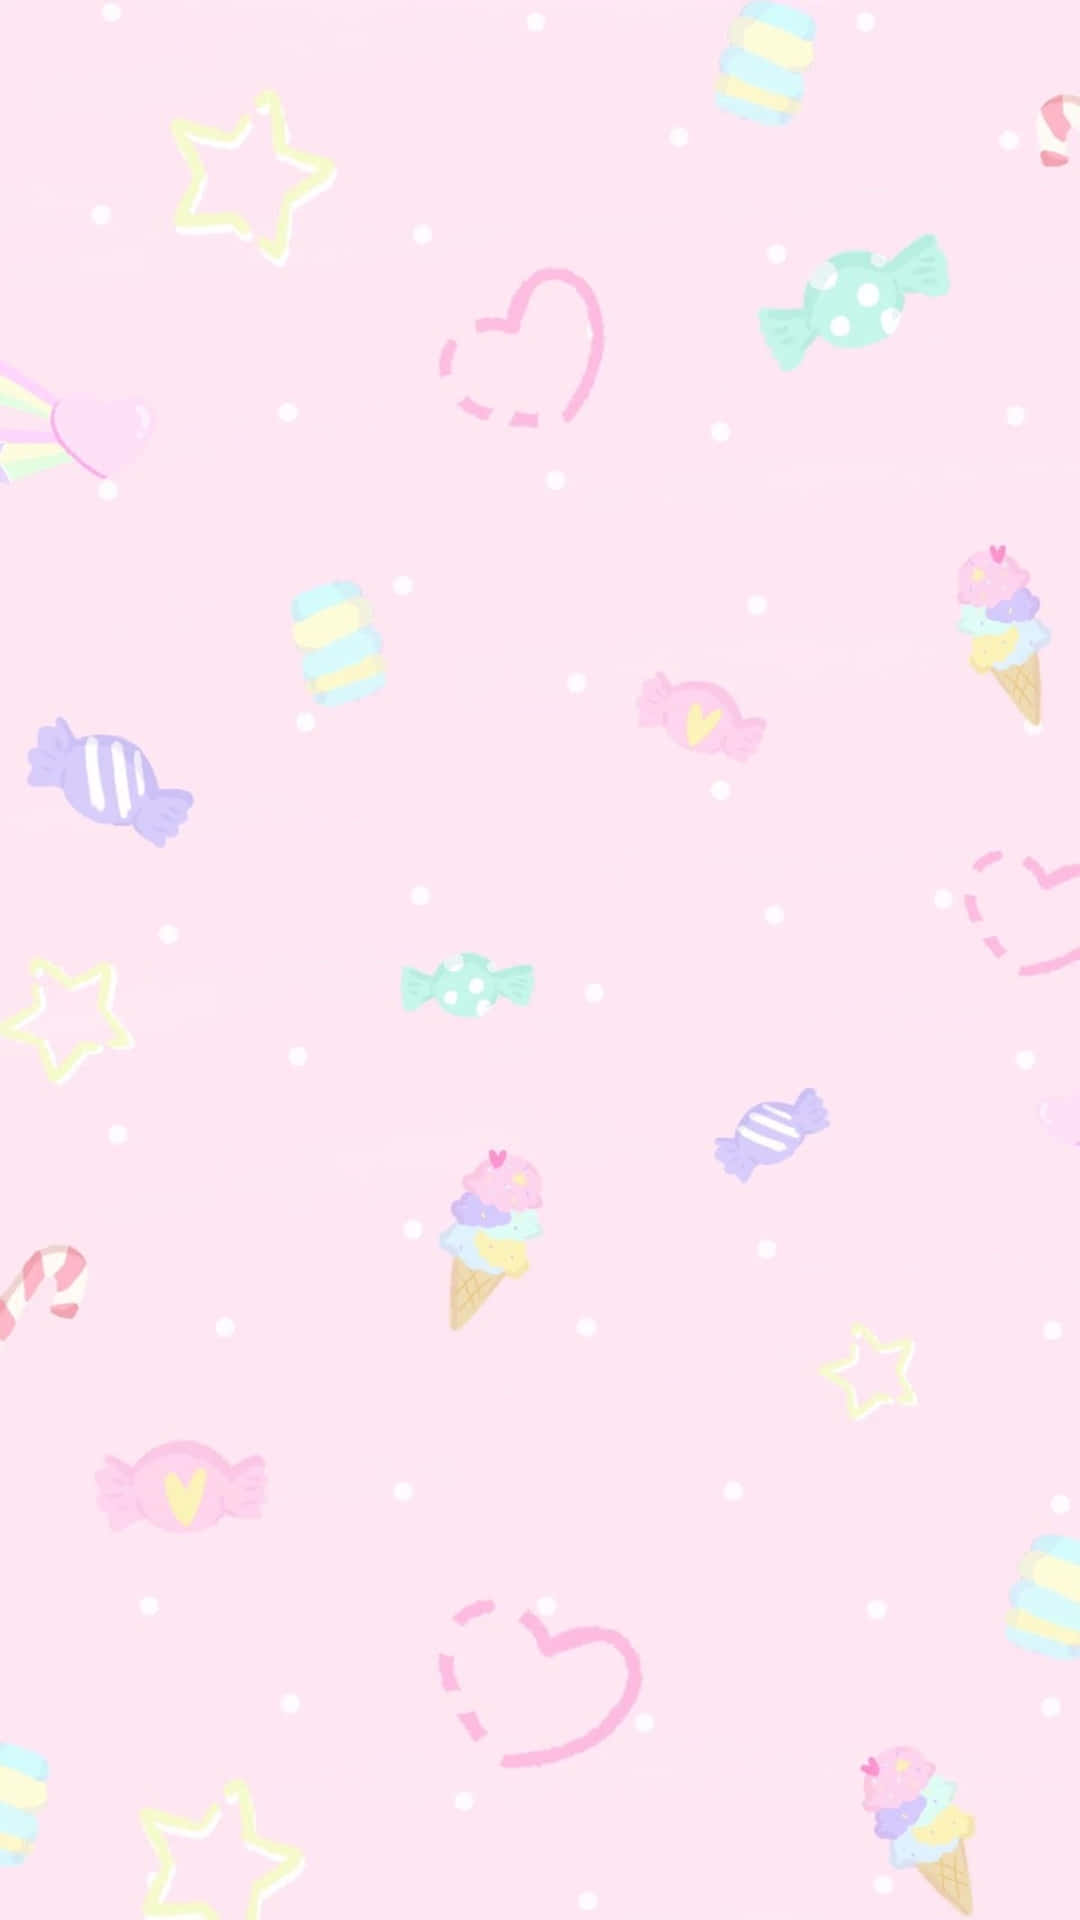 Aesthetic pastel colors for a cute and kawaii feeling Wallpaper